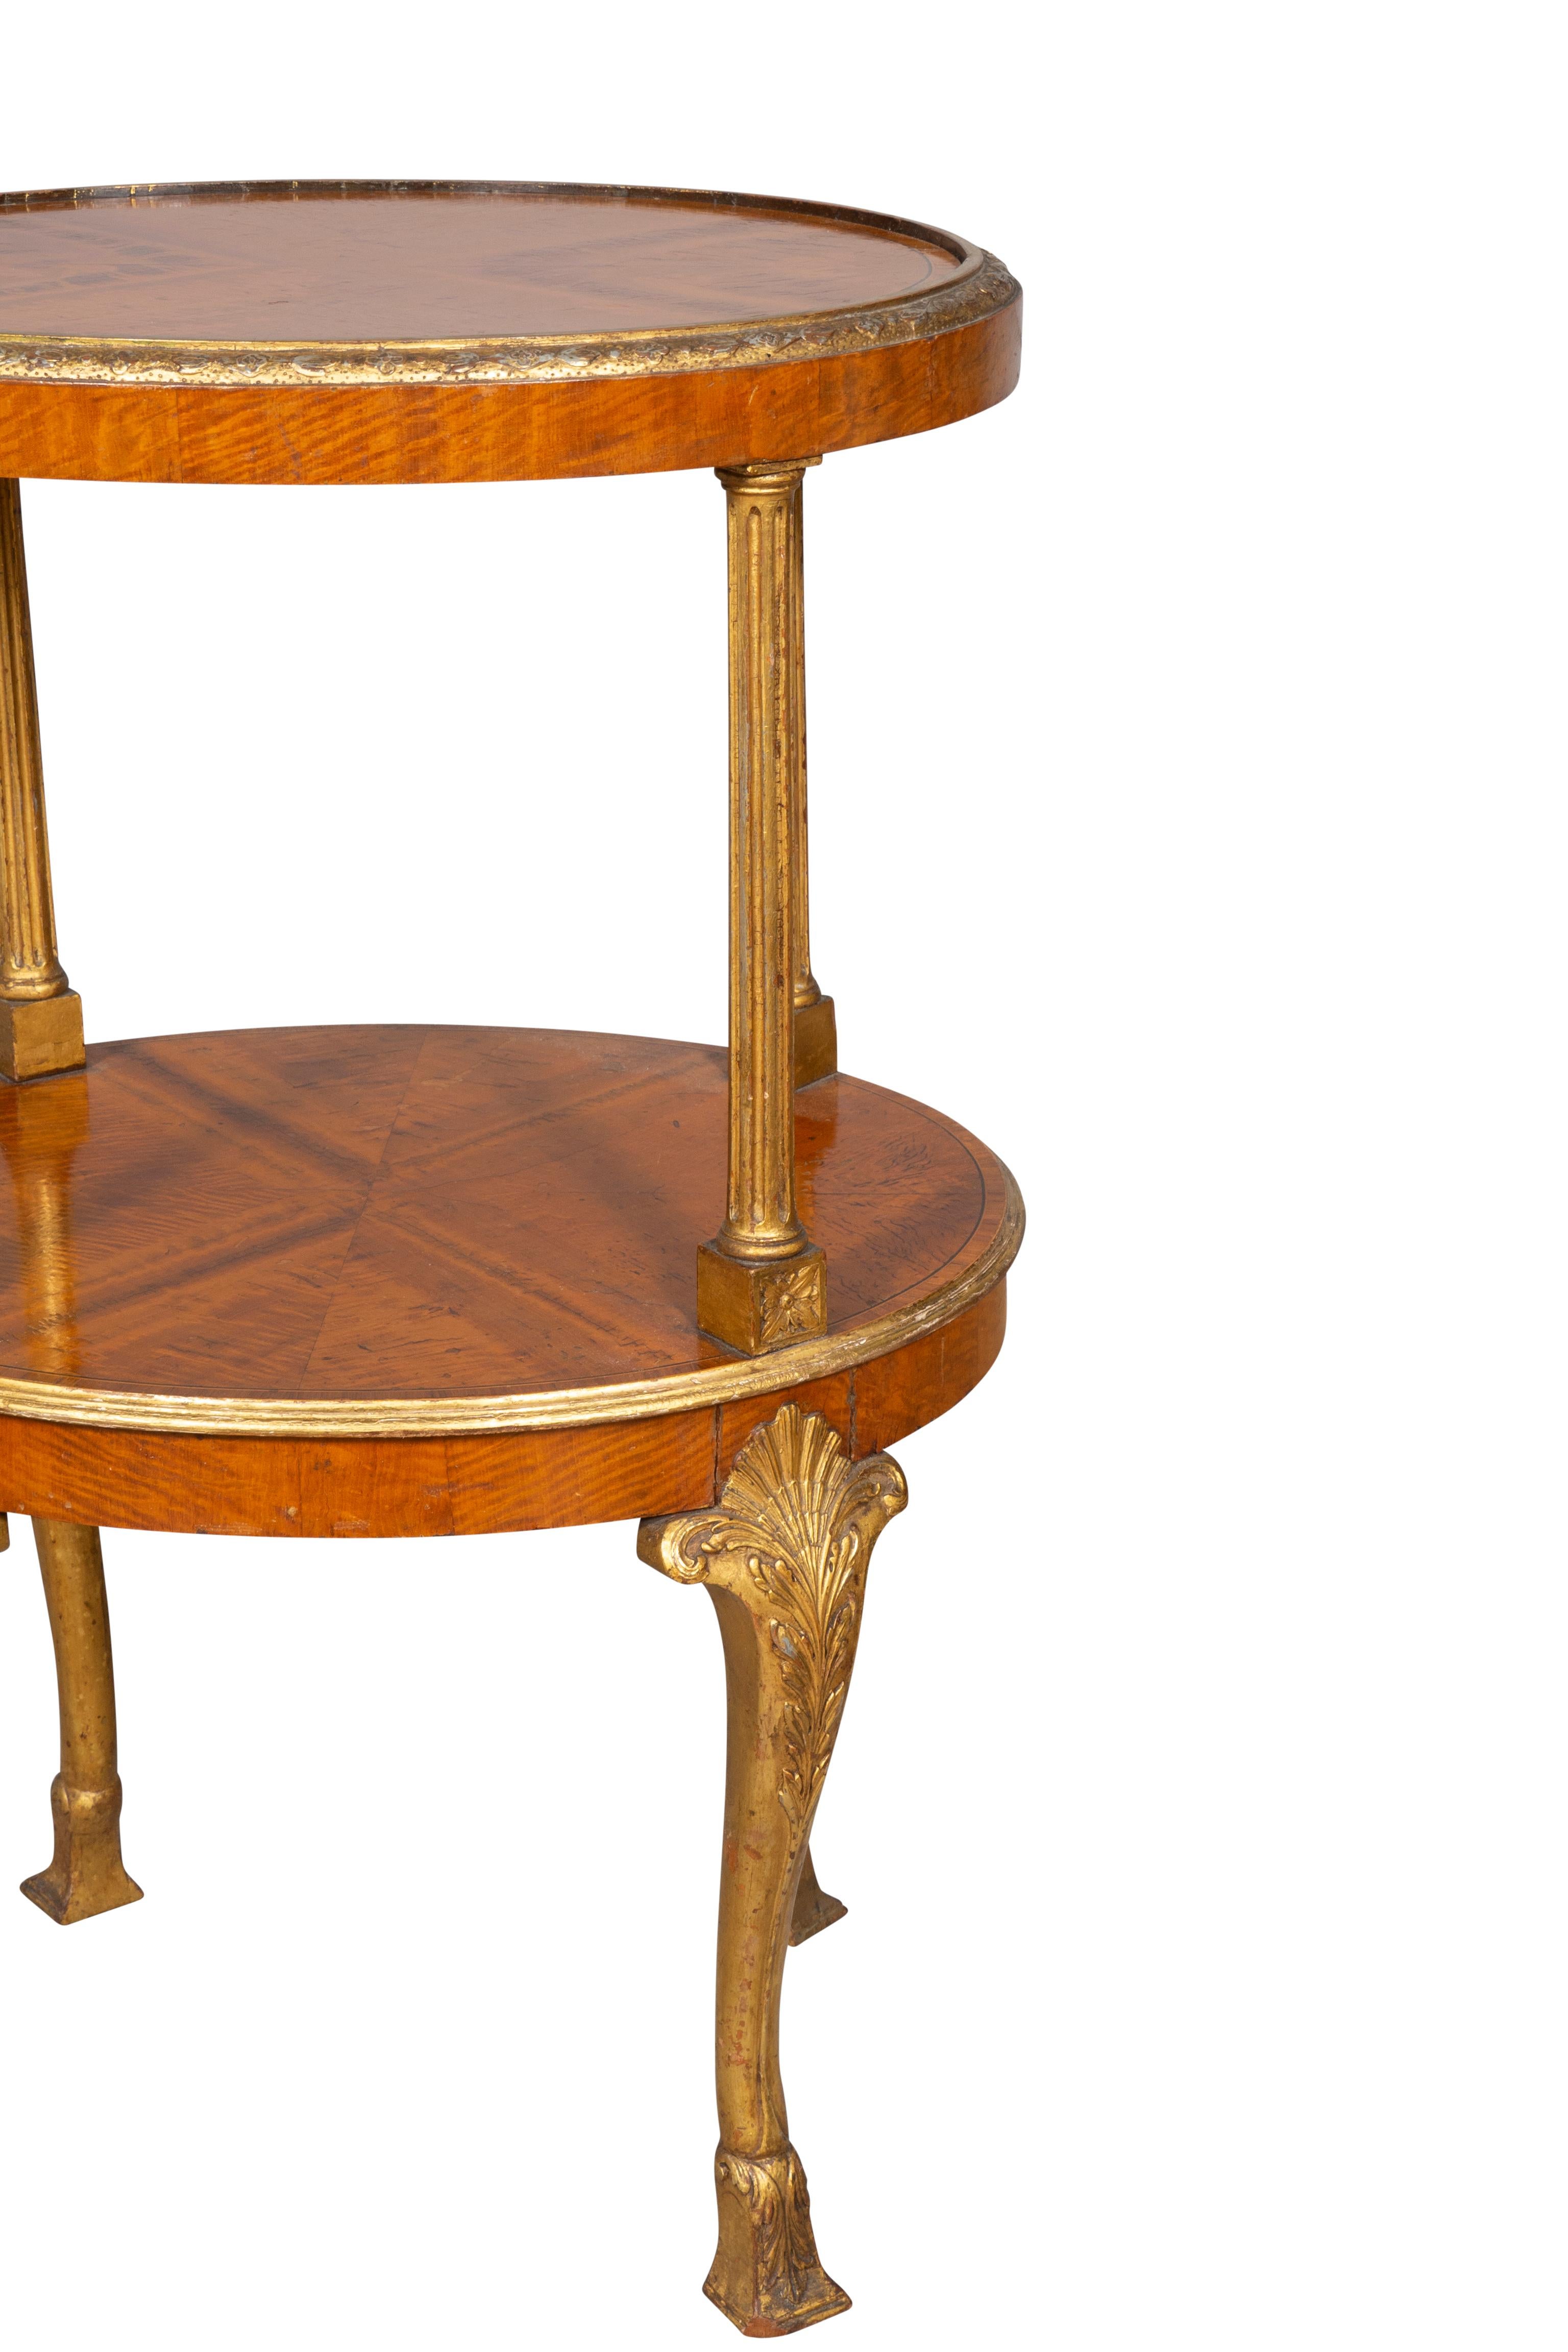 Edwardian Satinwood and Gilded Table In Good Condition For Sale In Essex, MA